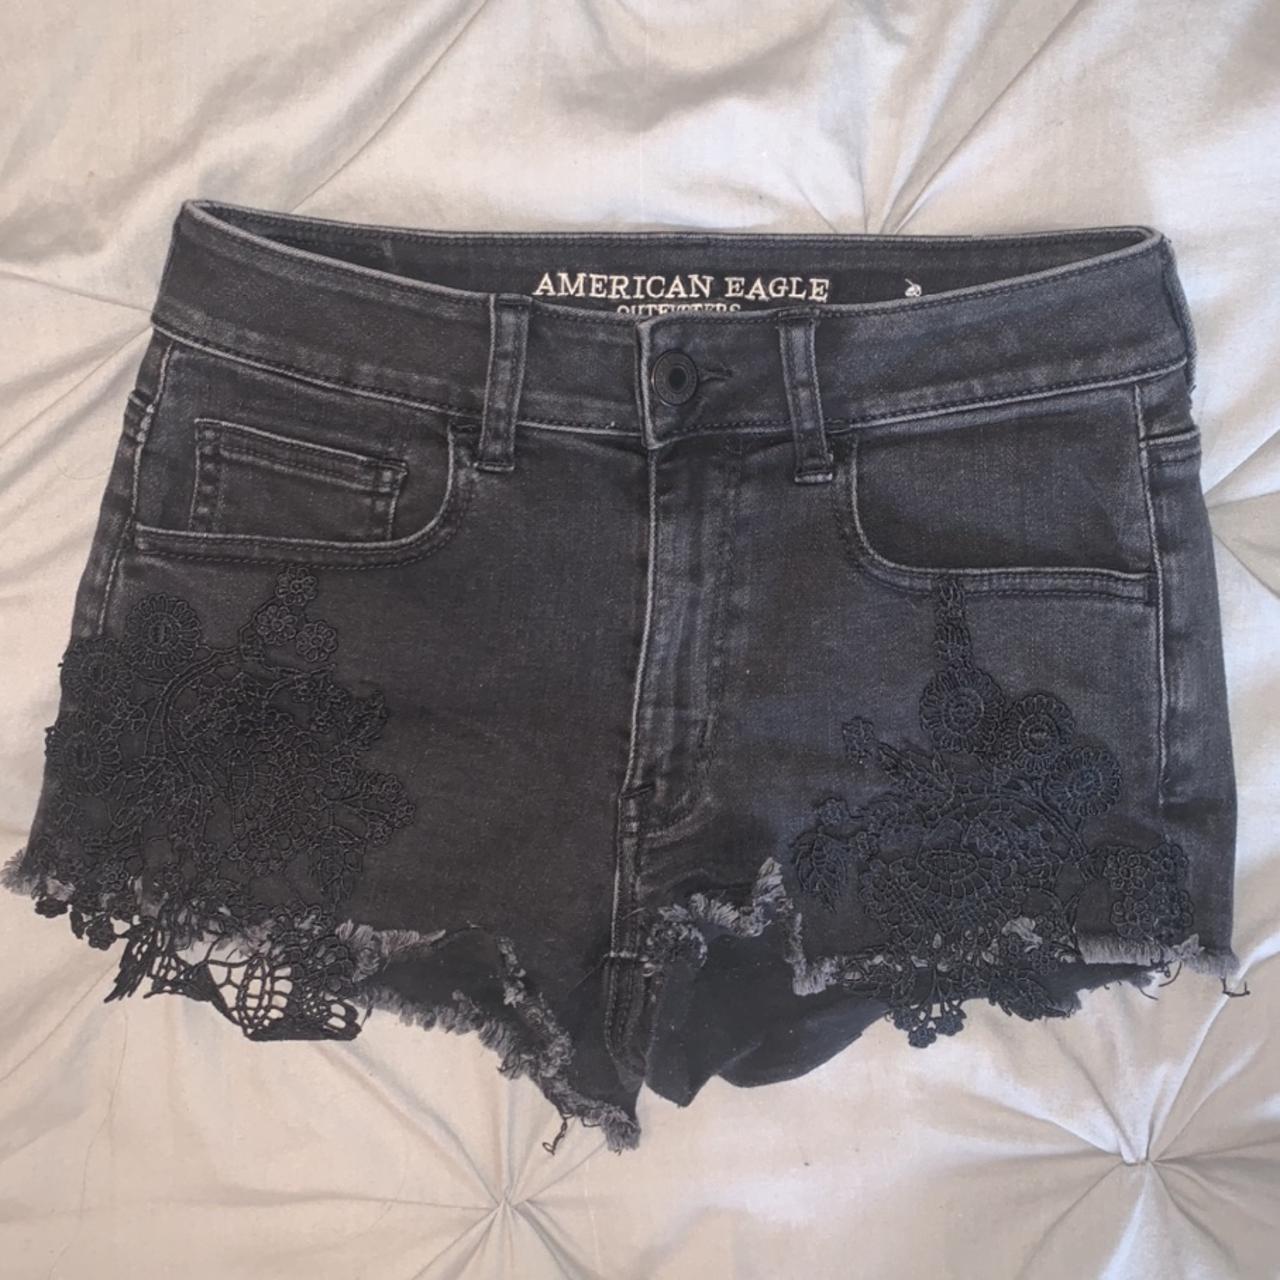 American Eagle Outfitters Women's Black Shorts